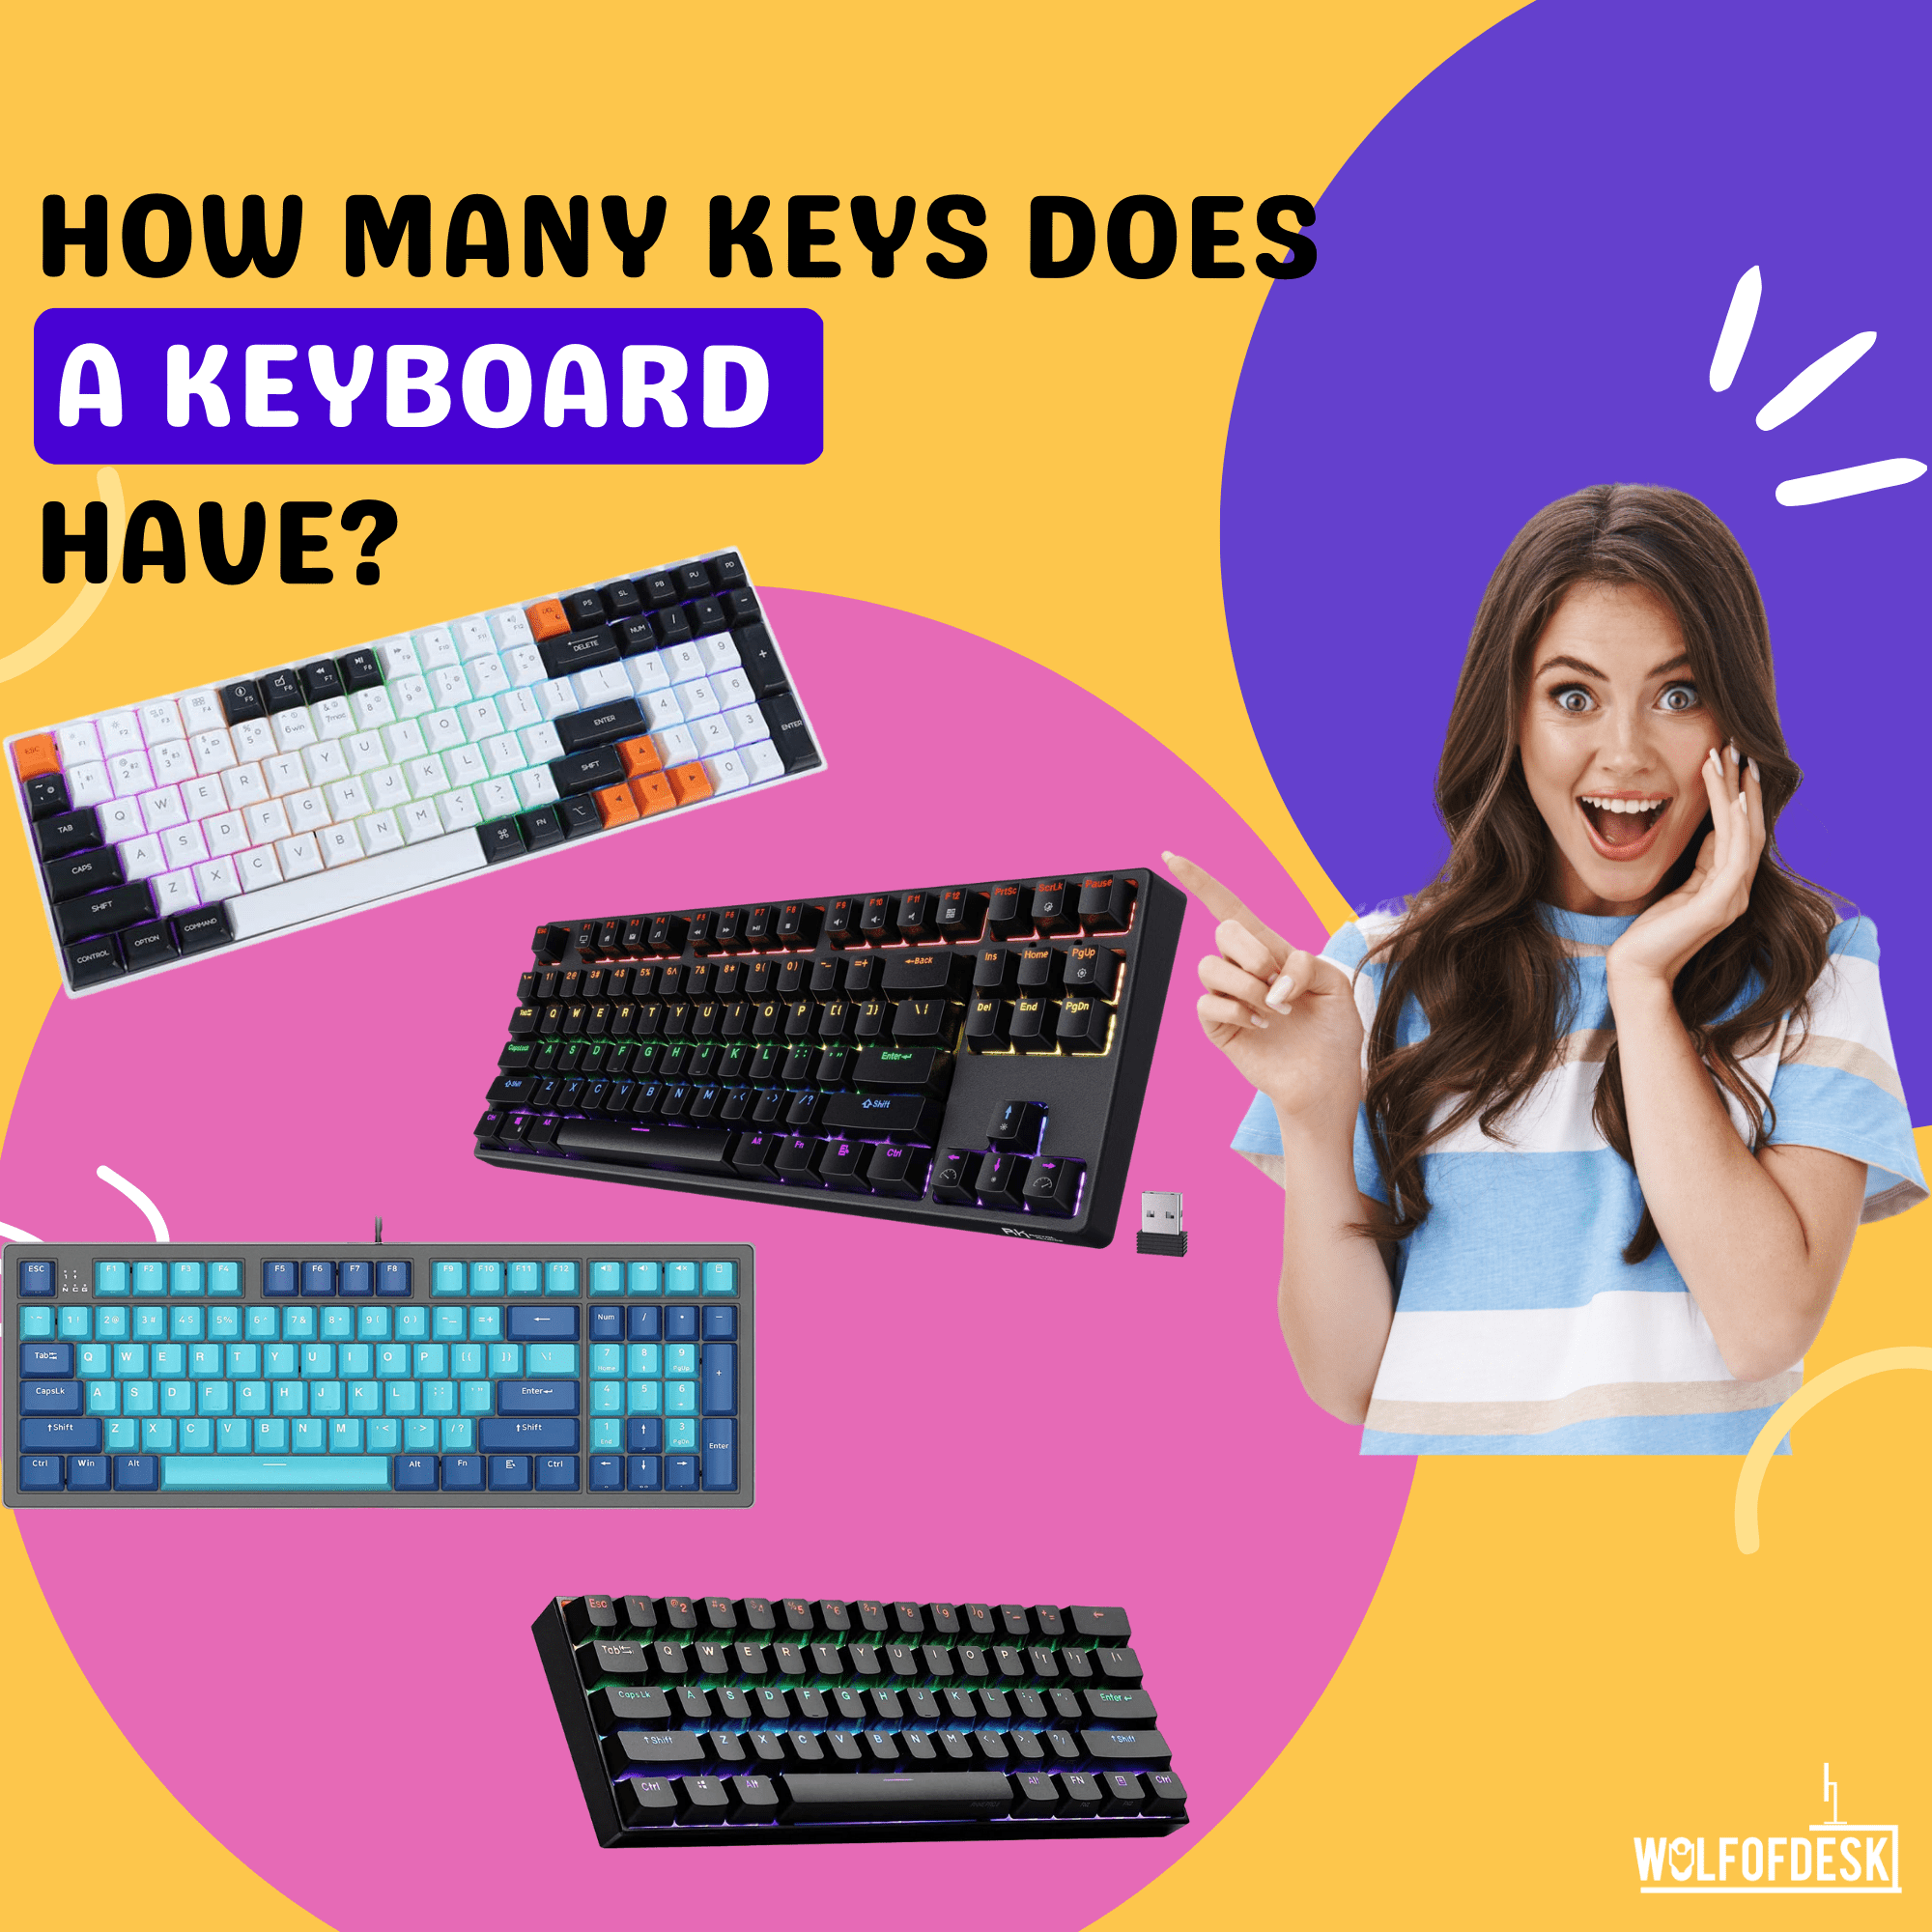 how many keys does a keyboard have - answered